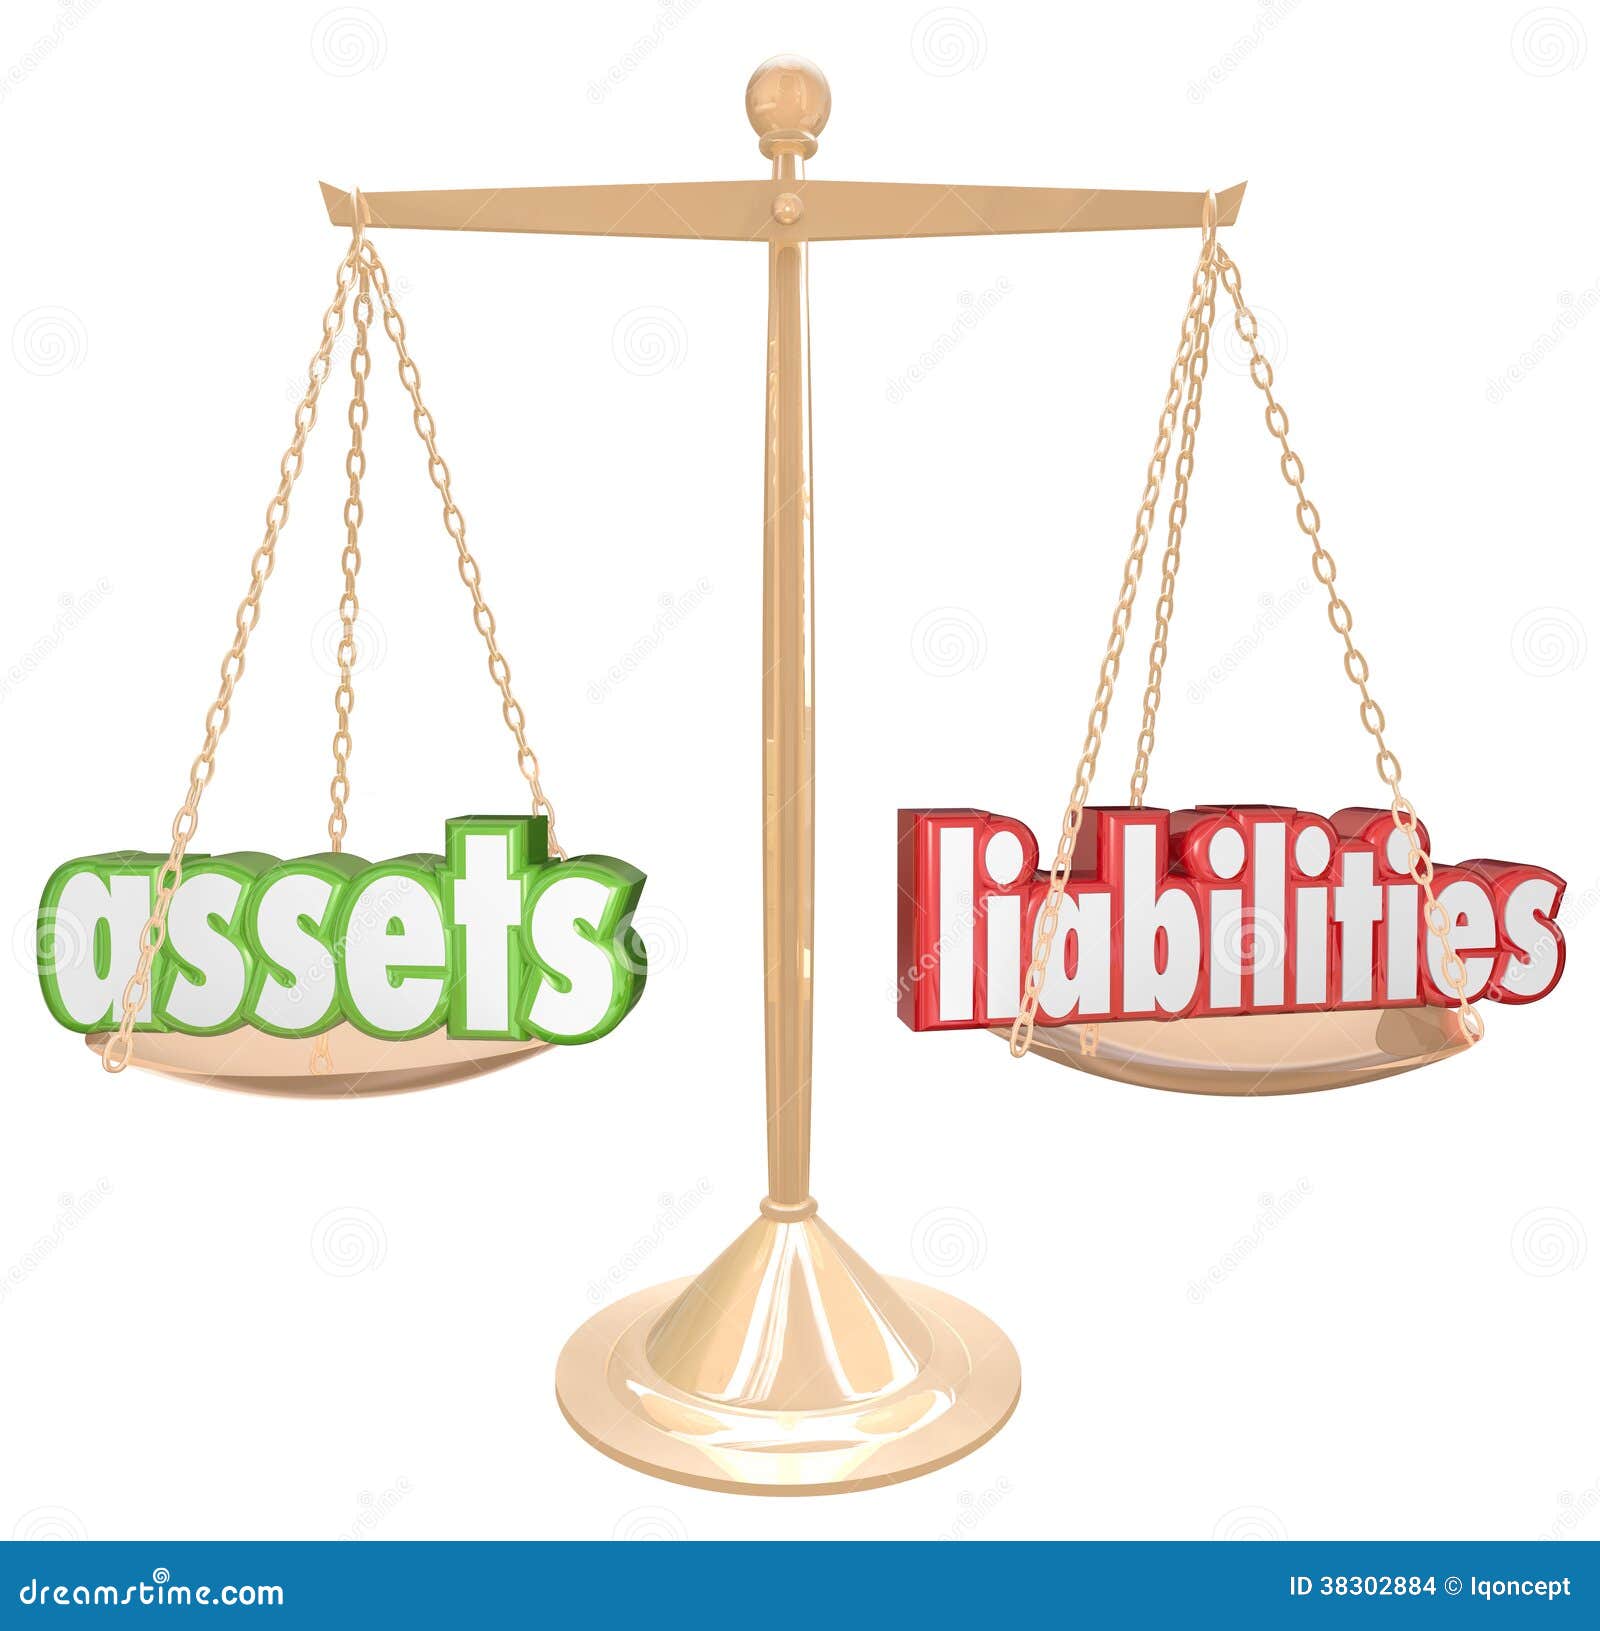 assets vs liabilities words scale comparing value wealth account